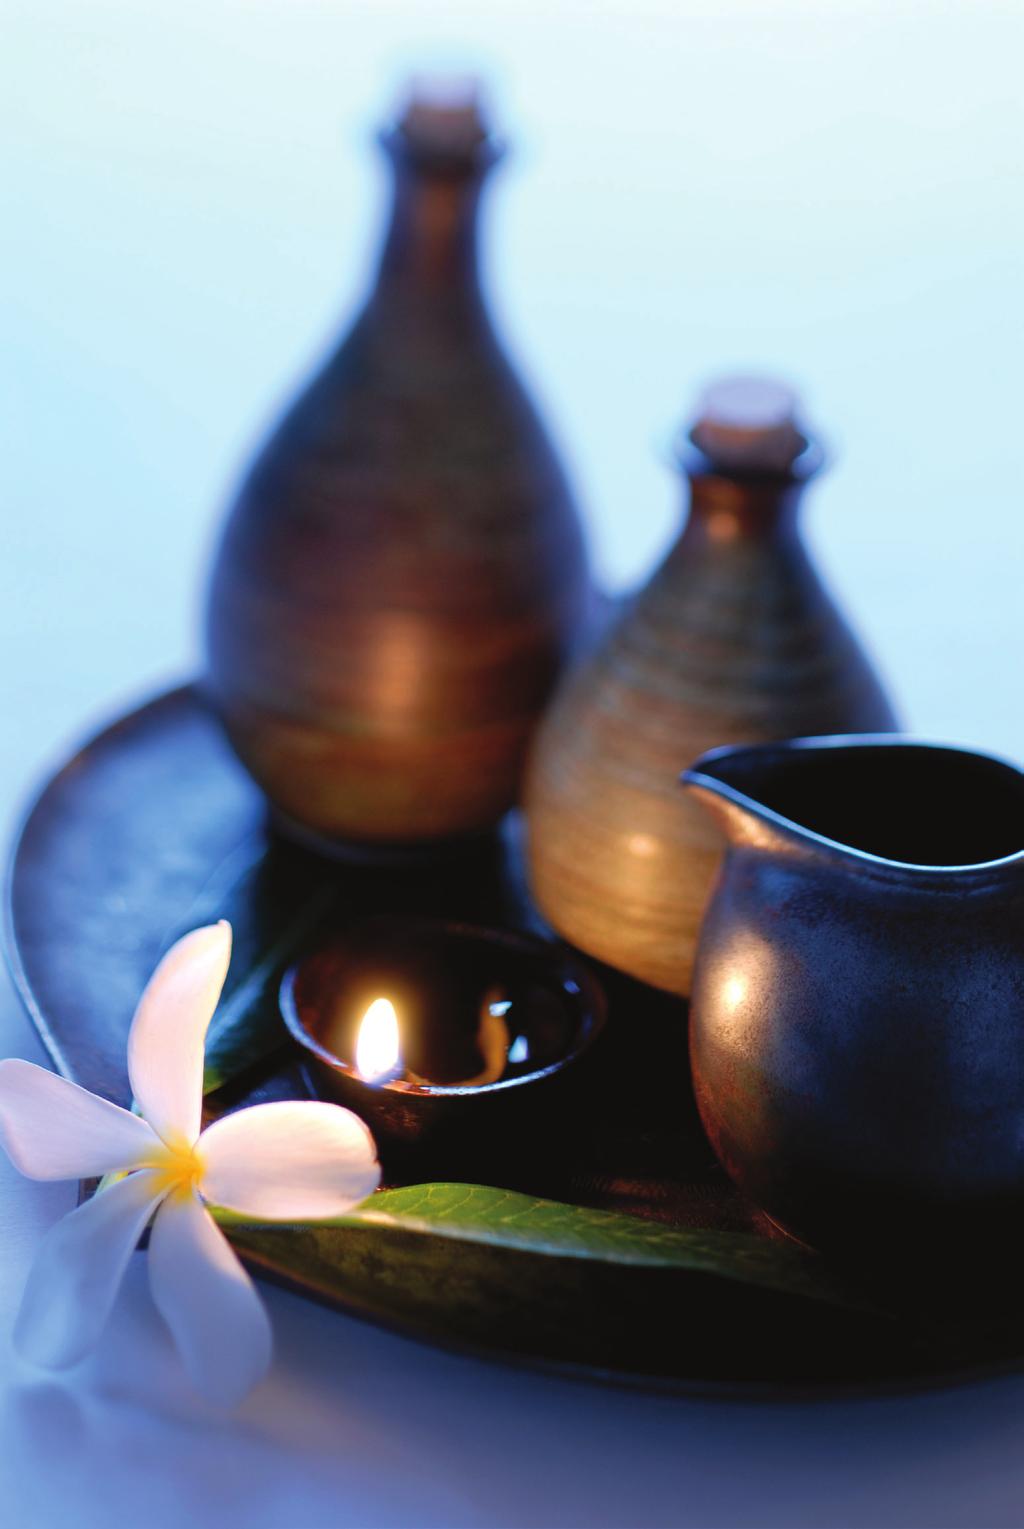 At Grand Hyatt Kochi Bolgatty, we believe that holistic health and rejuvenation should be one of many benefits our guests receive.